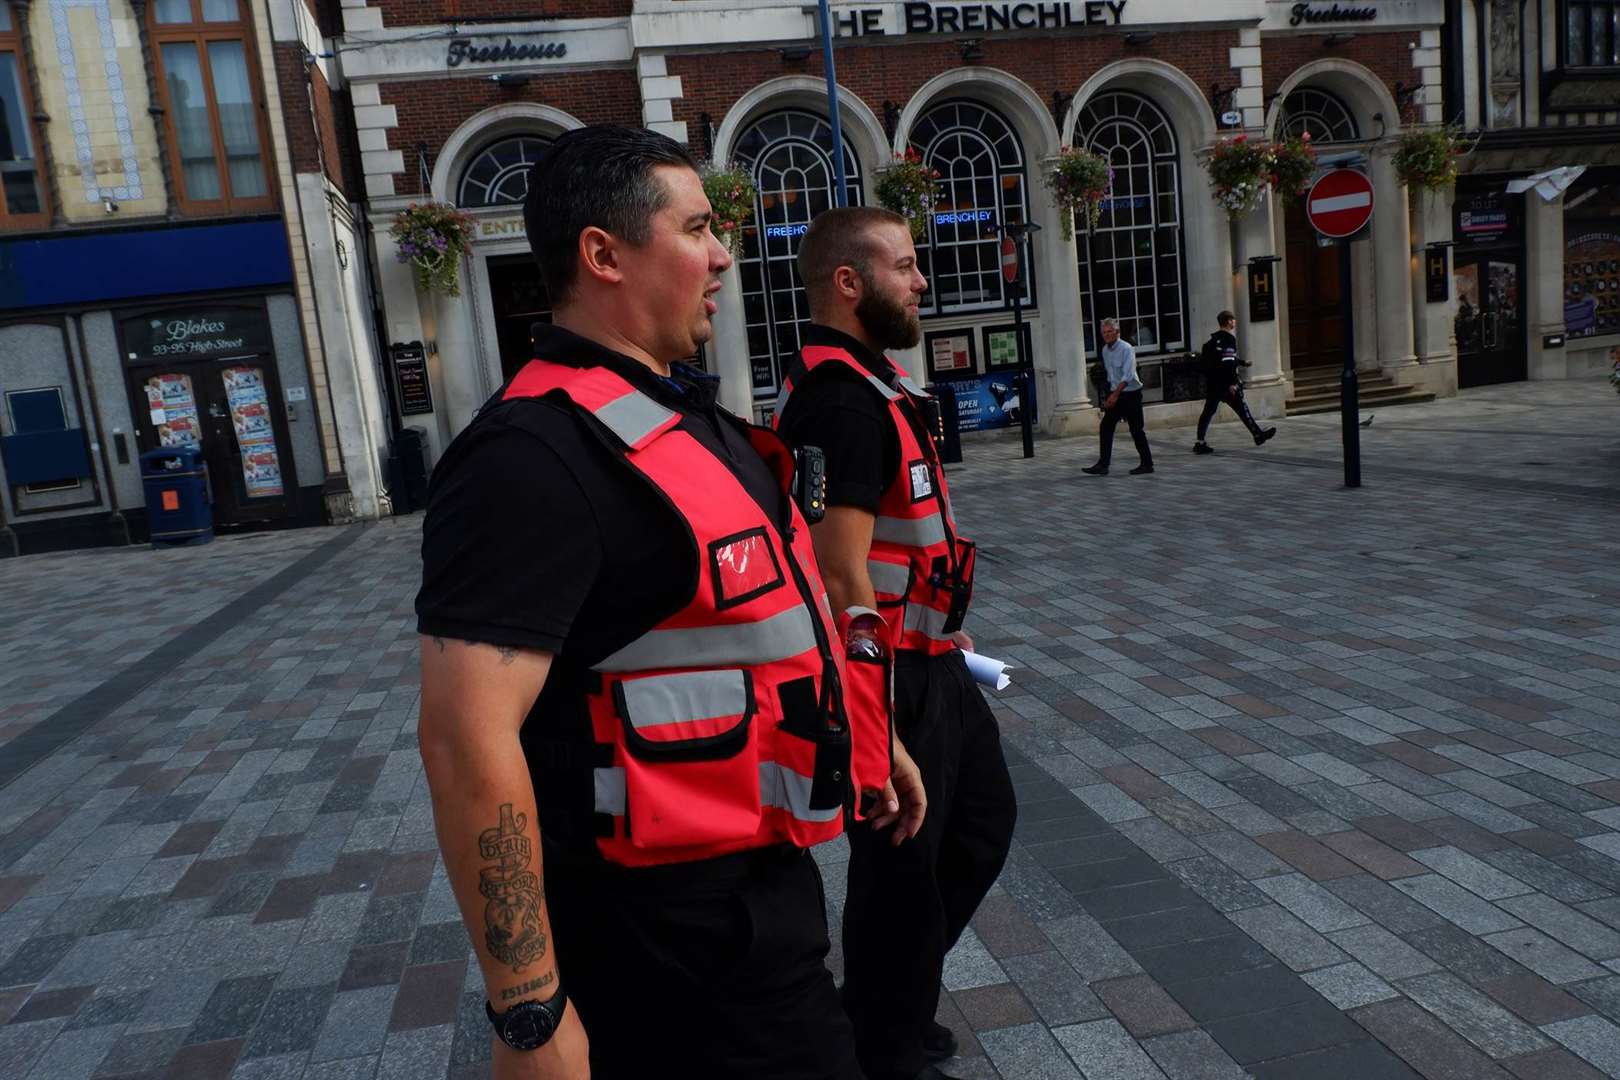 Ambassadors patrol the town during the week. Picture: One Maidstone